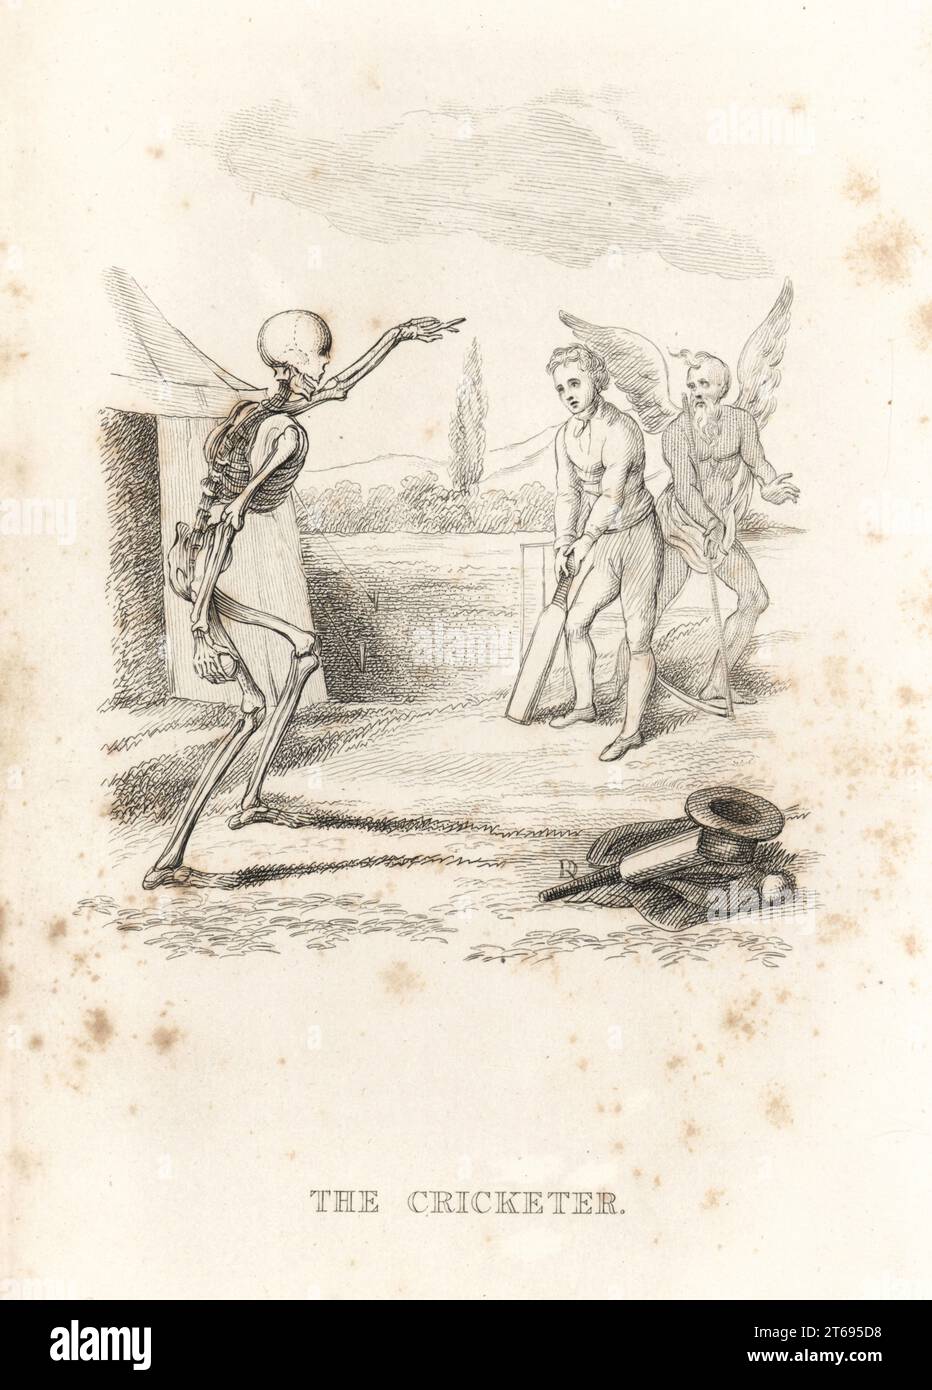 The skeleton of Death bowls a ball at a cricketer at bat. The wicket keeper is Father Time with his scythe. A top hat, coat, cricket bat and ball lie on the ground. Illustration drawn and engraved on steel by Richard Dagley from his own Deaths Doings, Consisting of Numerous Original Compositions in Verse and Prose, J. Andrews, London, 1827. Dagley (1761-1841) was an English painter, illustrator and engraver. Stock Photo